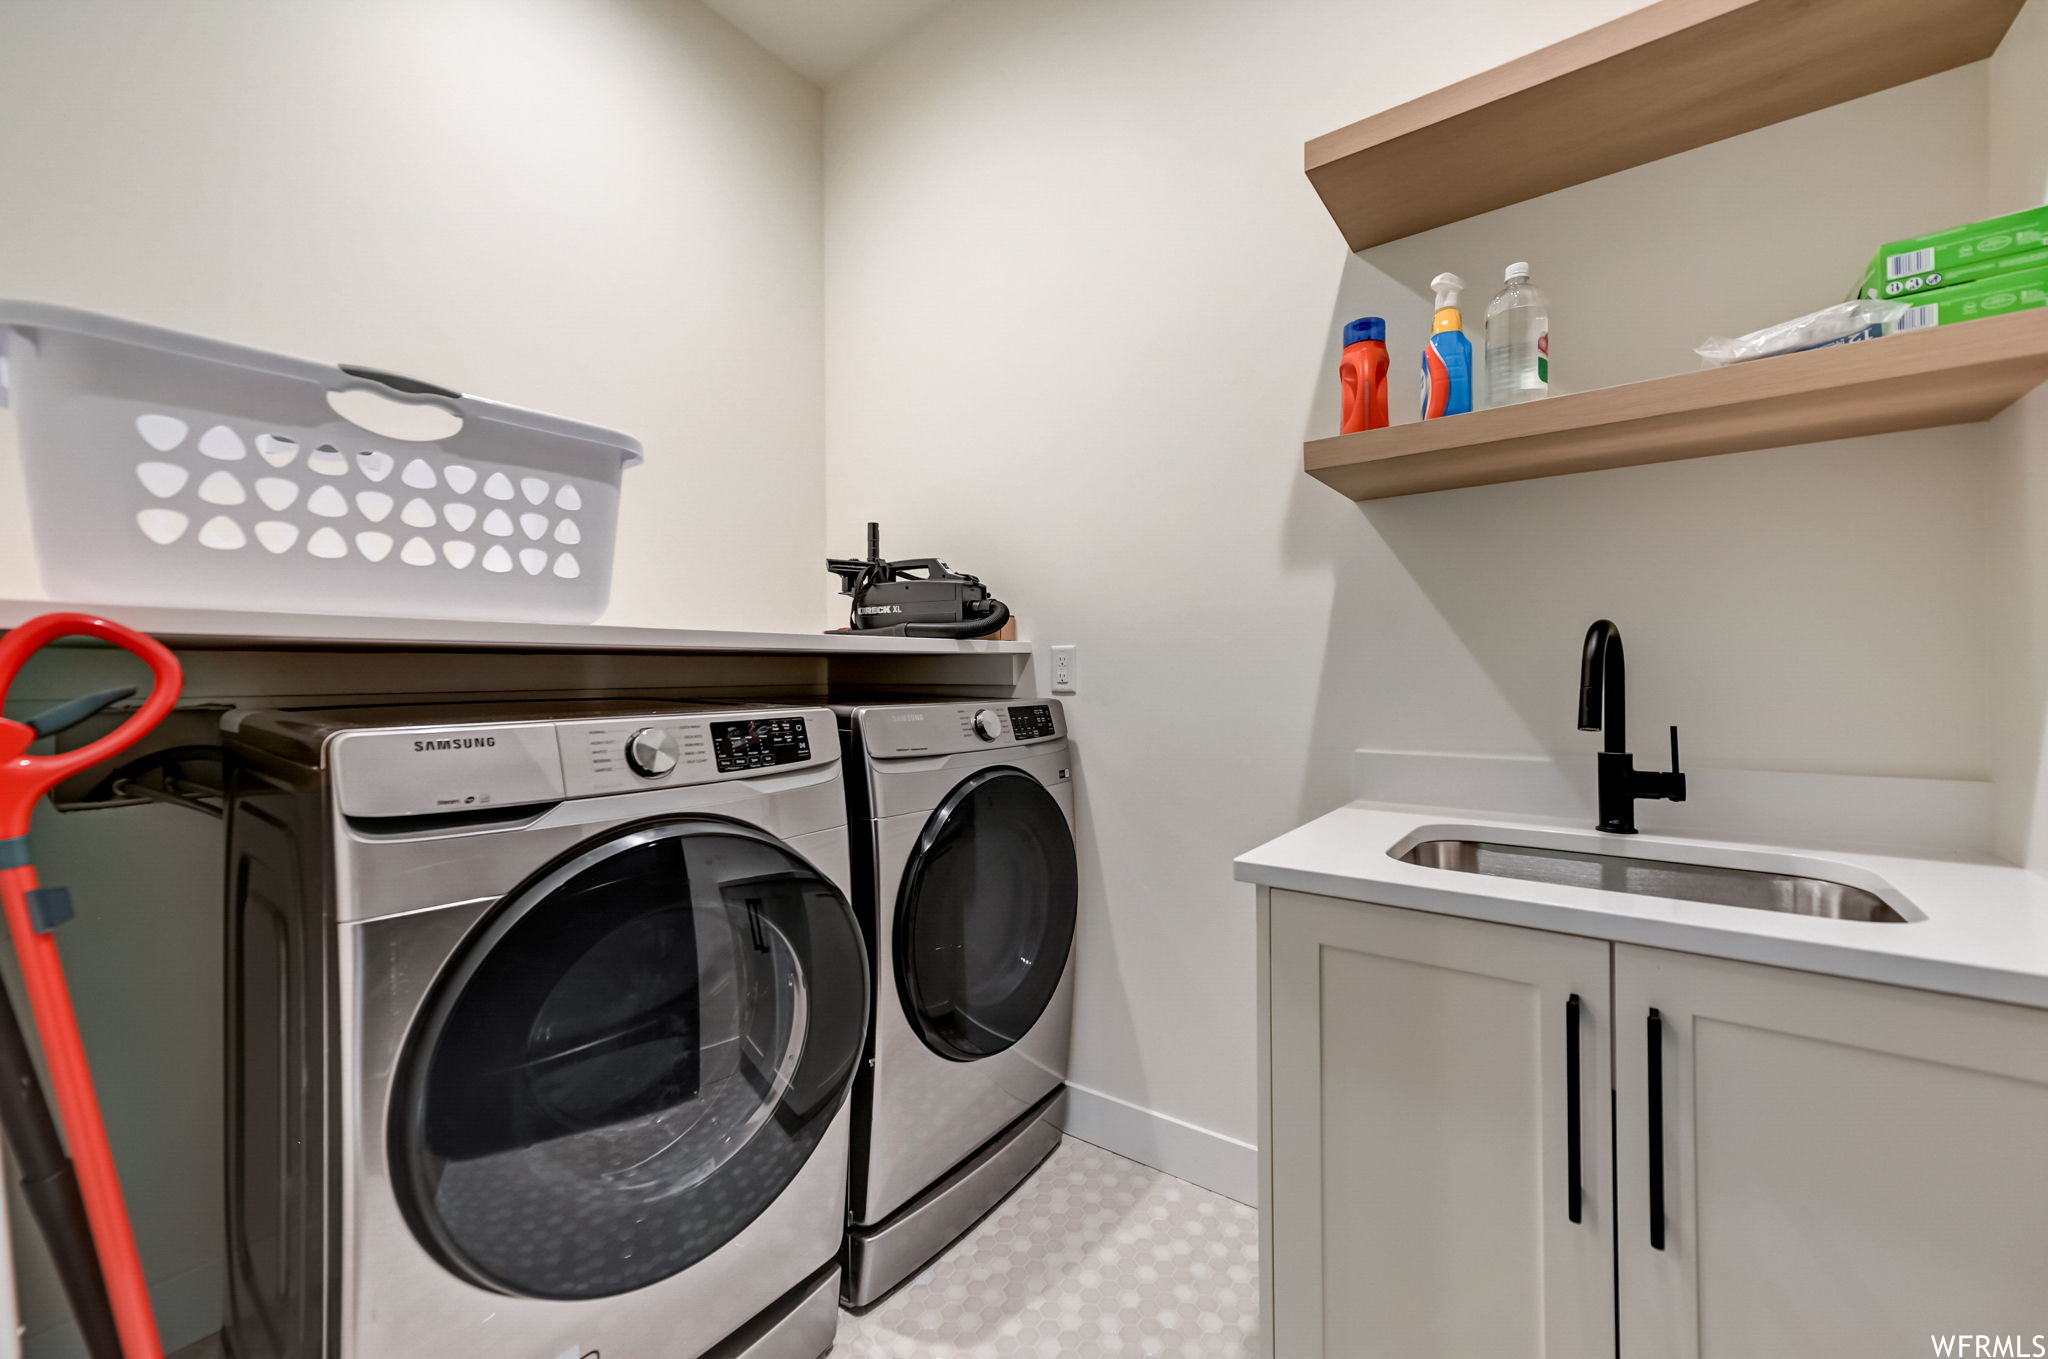 Clothes washing area featuring washer and clothes dryer, cabinets, sink, and light tile floors